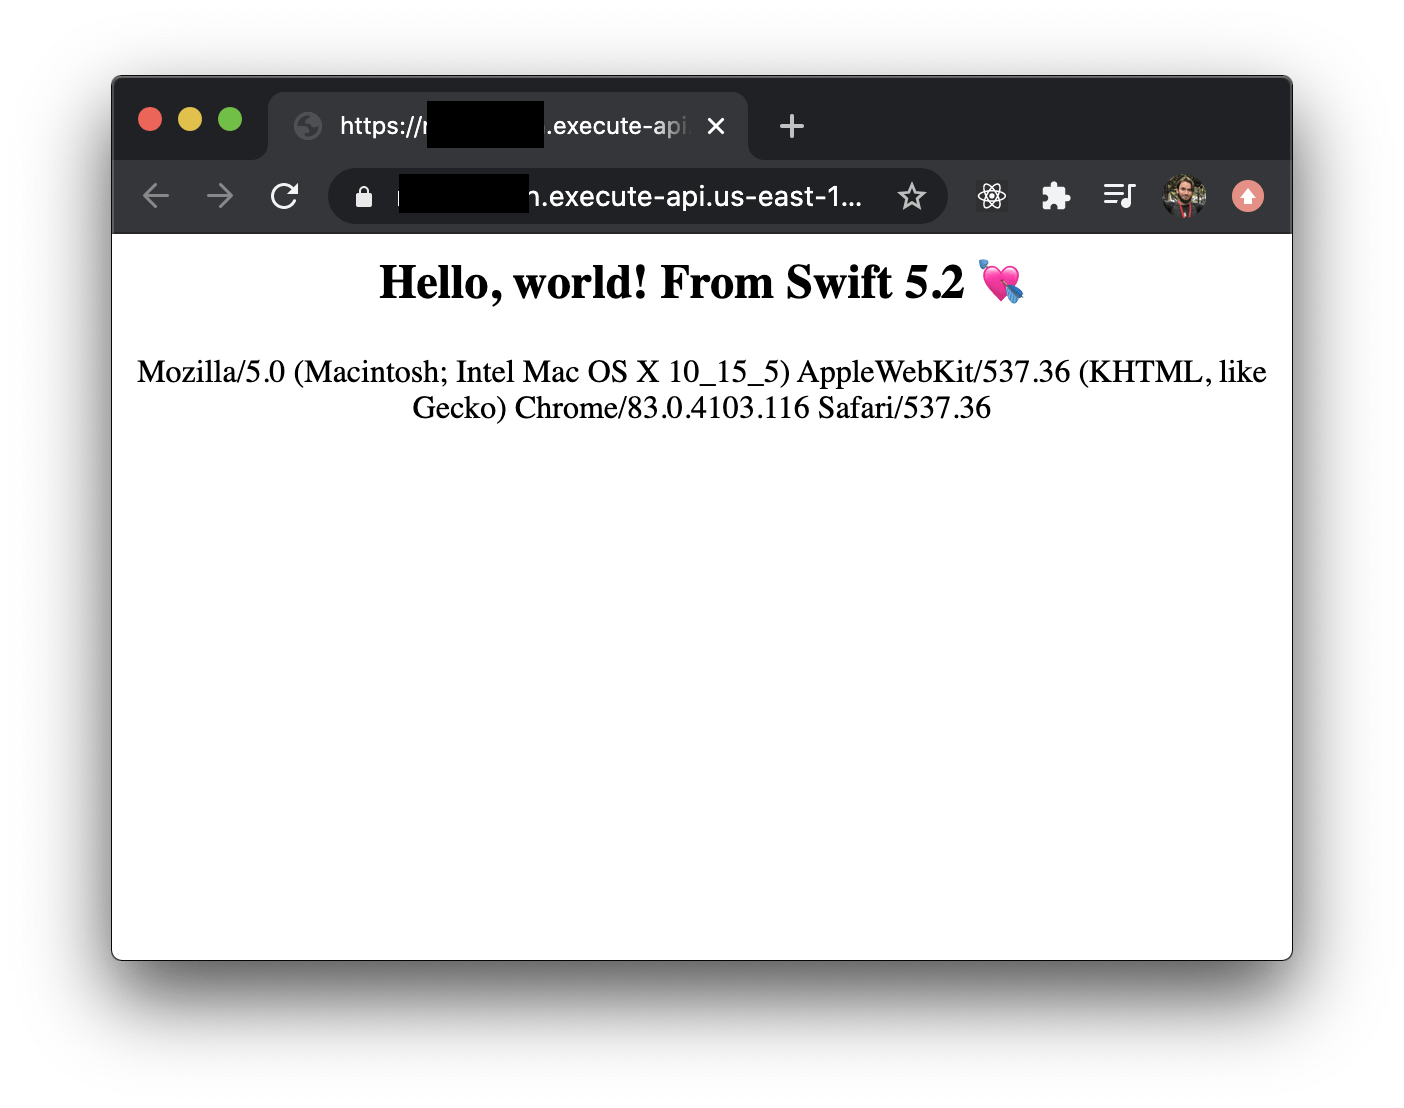 Image shows a browser on an AWS Lambda URL showing the words "Hello, world! From Swift 5.2 💘 and a User Agent string" output from the swift code